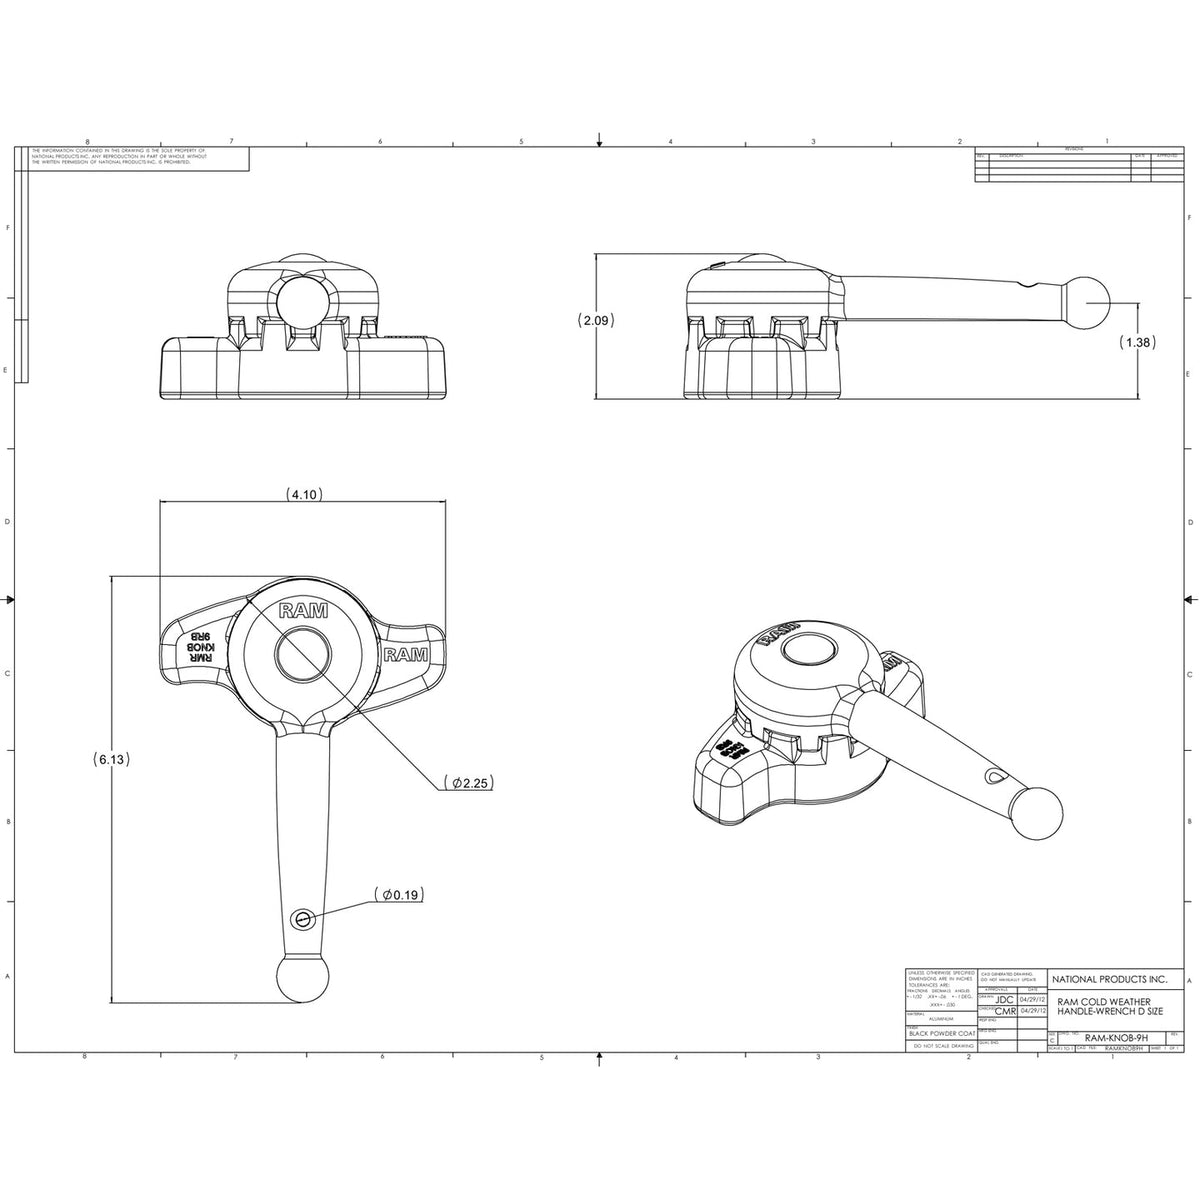 Engineering drawing of the RAM Hi-Torq Wrench for D size socket arms with all the exact dimensions of the product